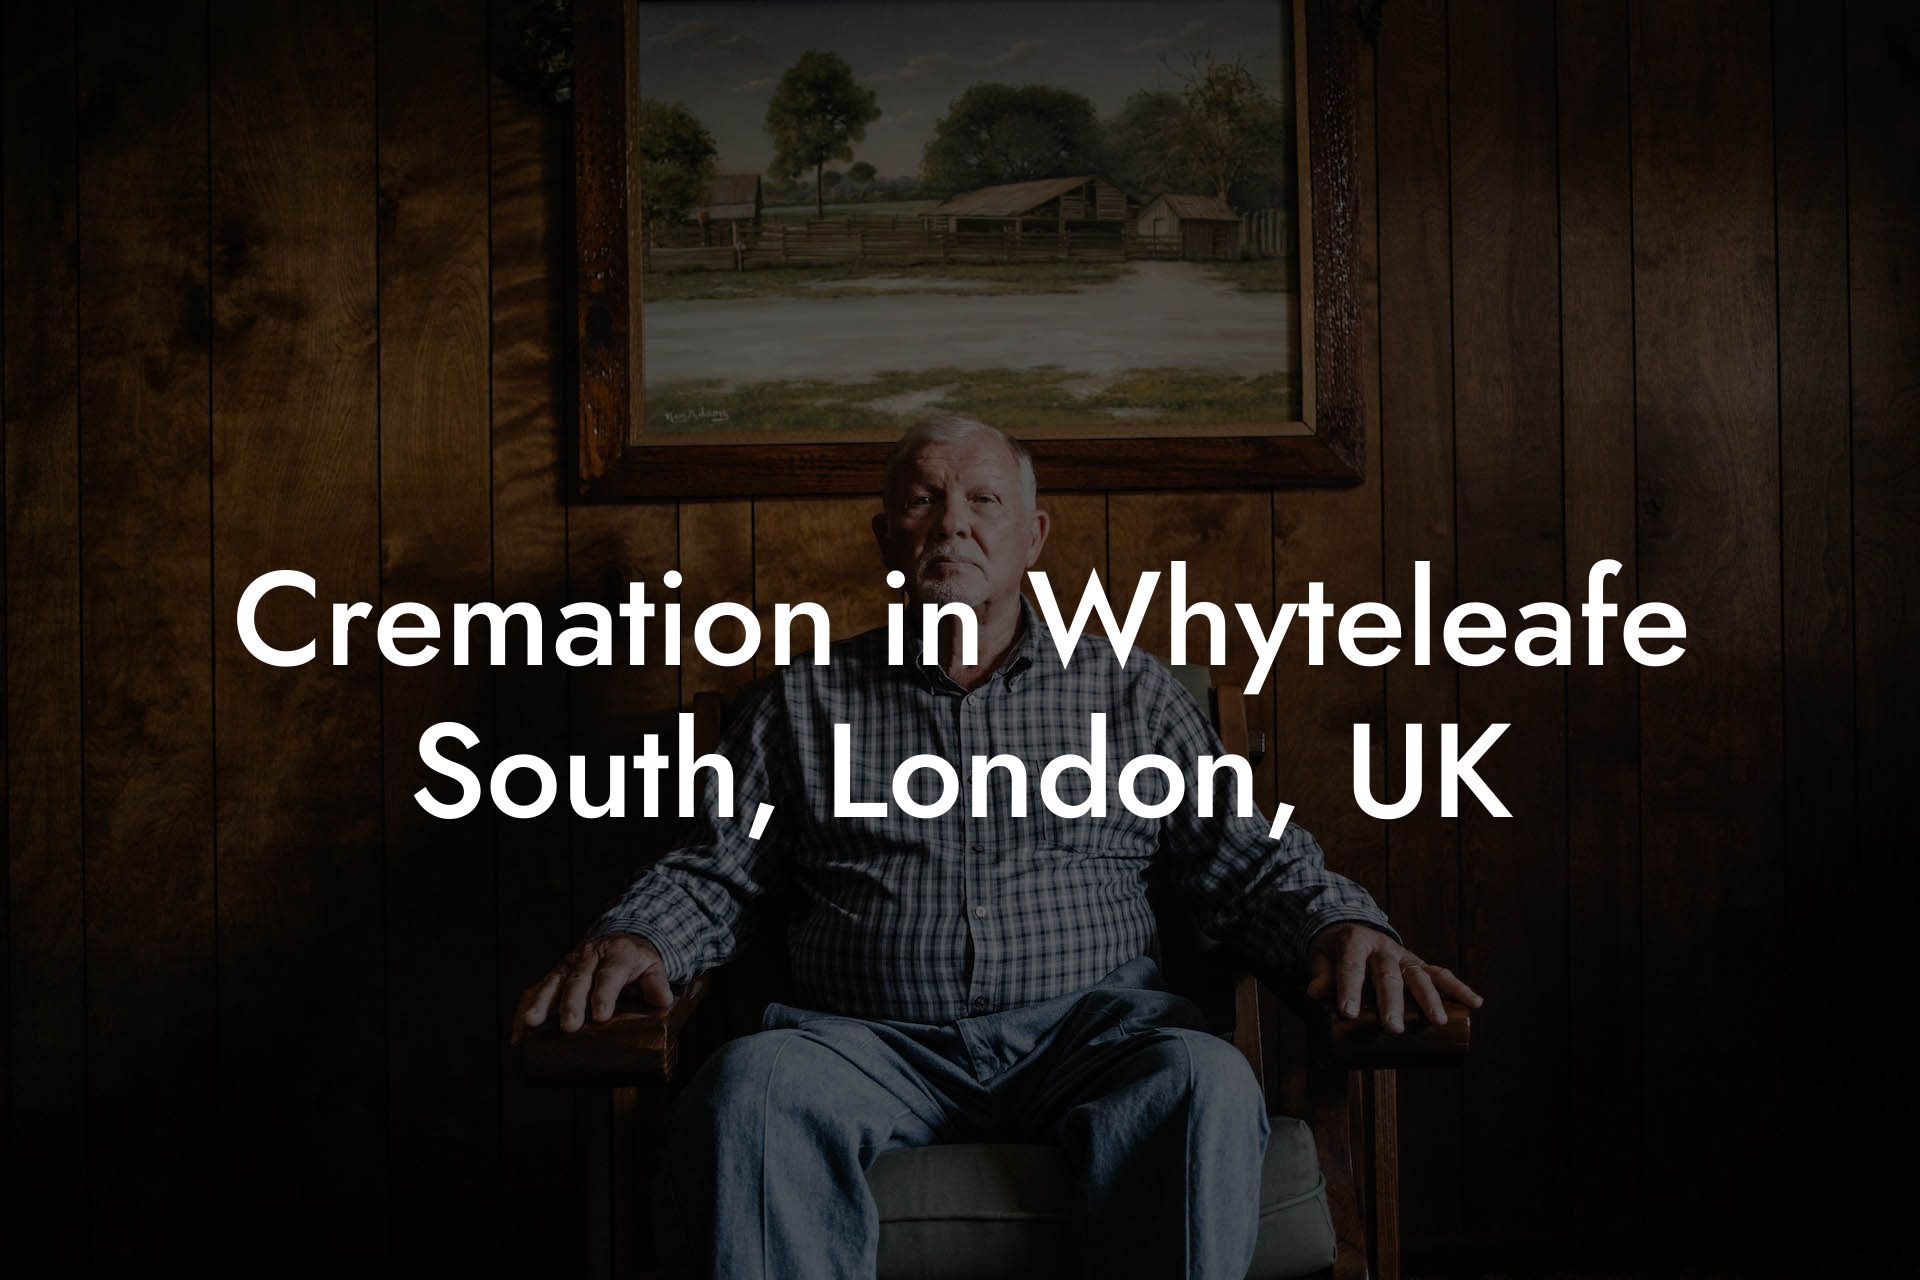 Cremation in Whyteleafe South, London, UK